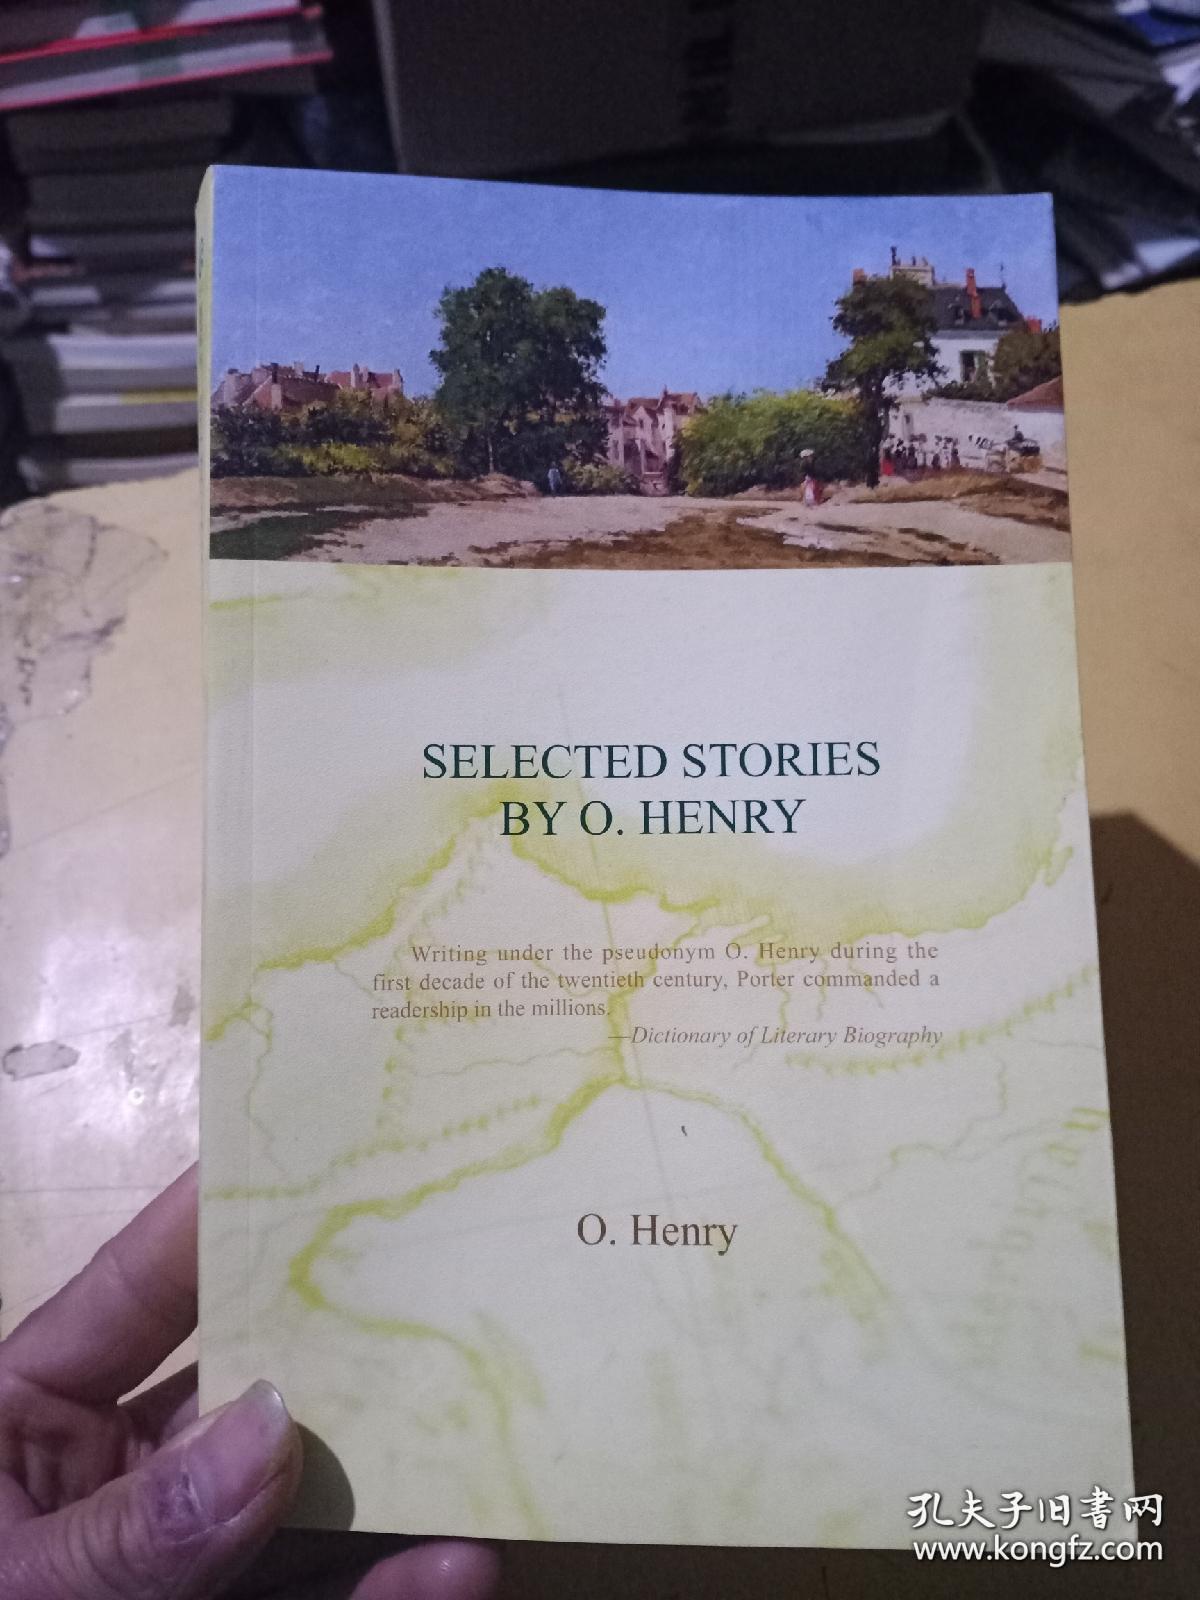 SELECTED STORIES BY O. HENRY